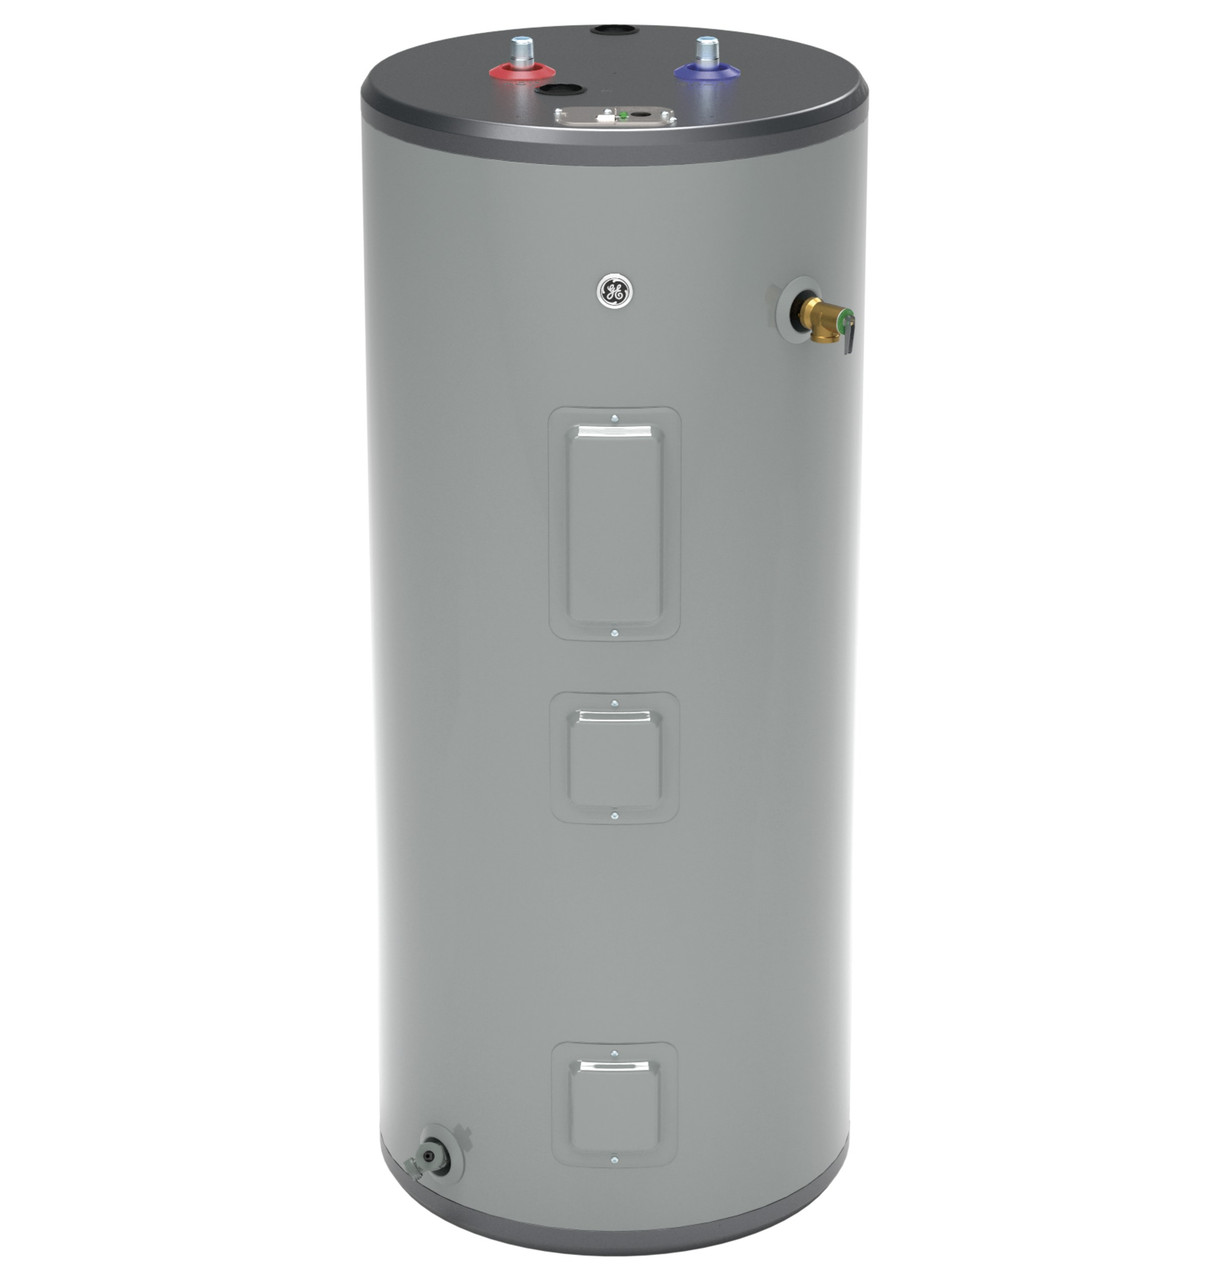 GE40S08BAM WATER HEATER 40 GALLON 8YR - Water Heaters and Parts